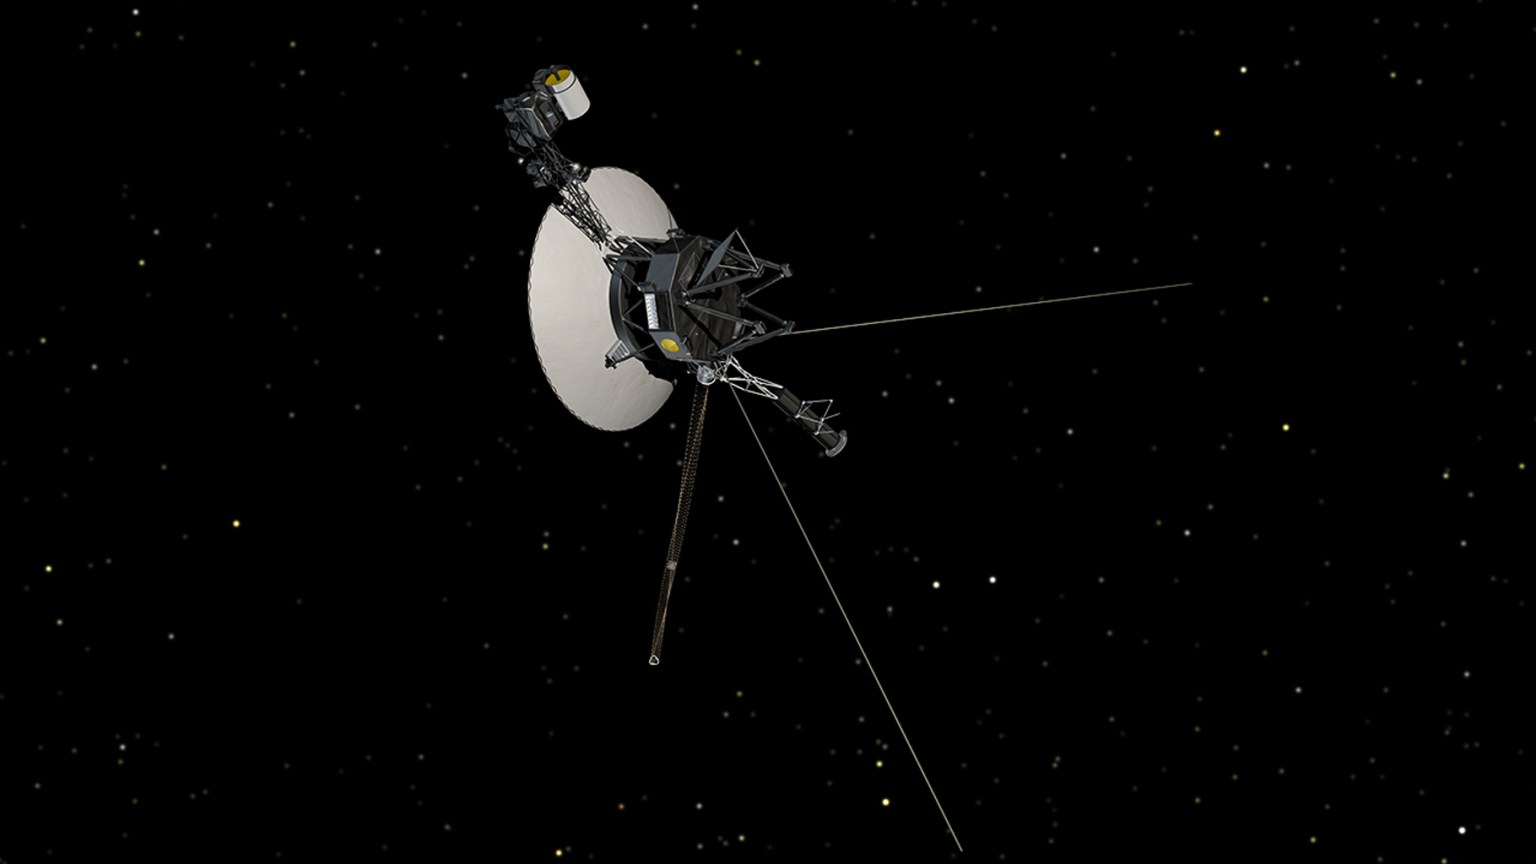 Artist's concept of the Voyager spacecraft